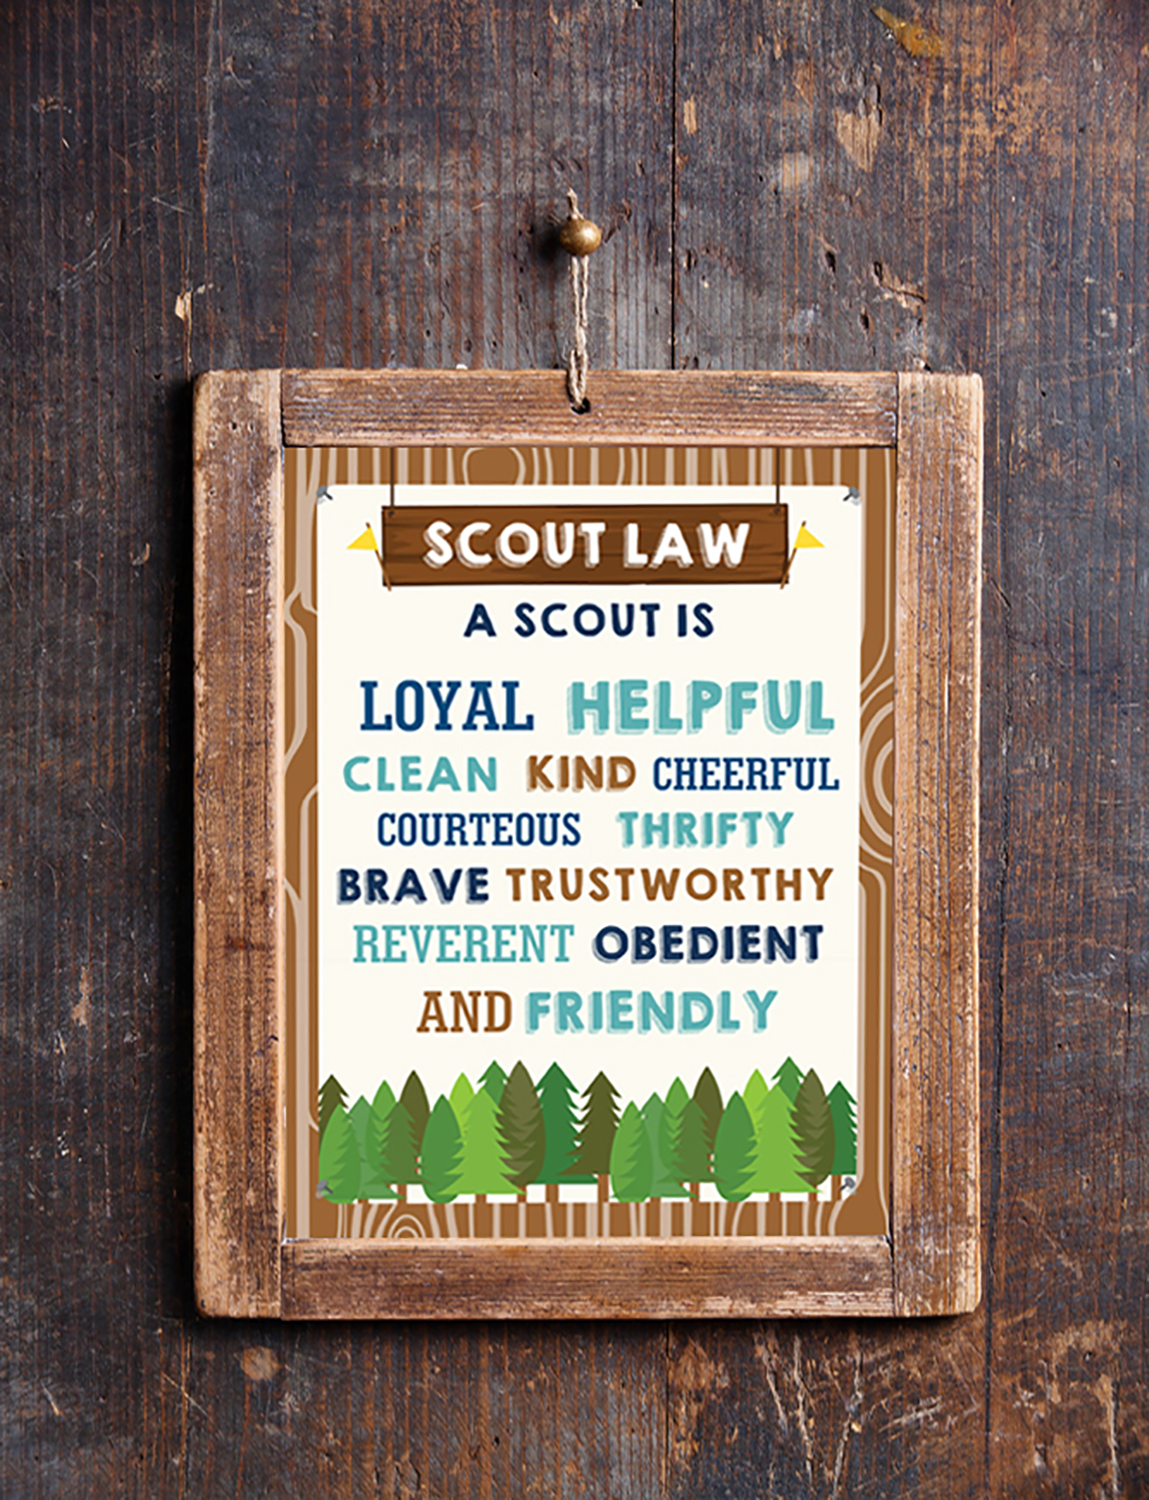 Instant Download - Boy Scout Motto, Oath and Law Posters. #boyscouts